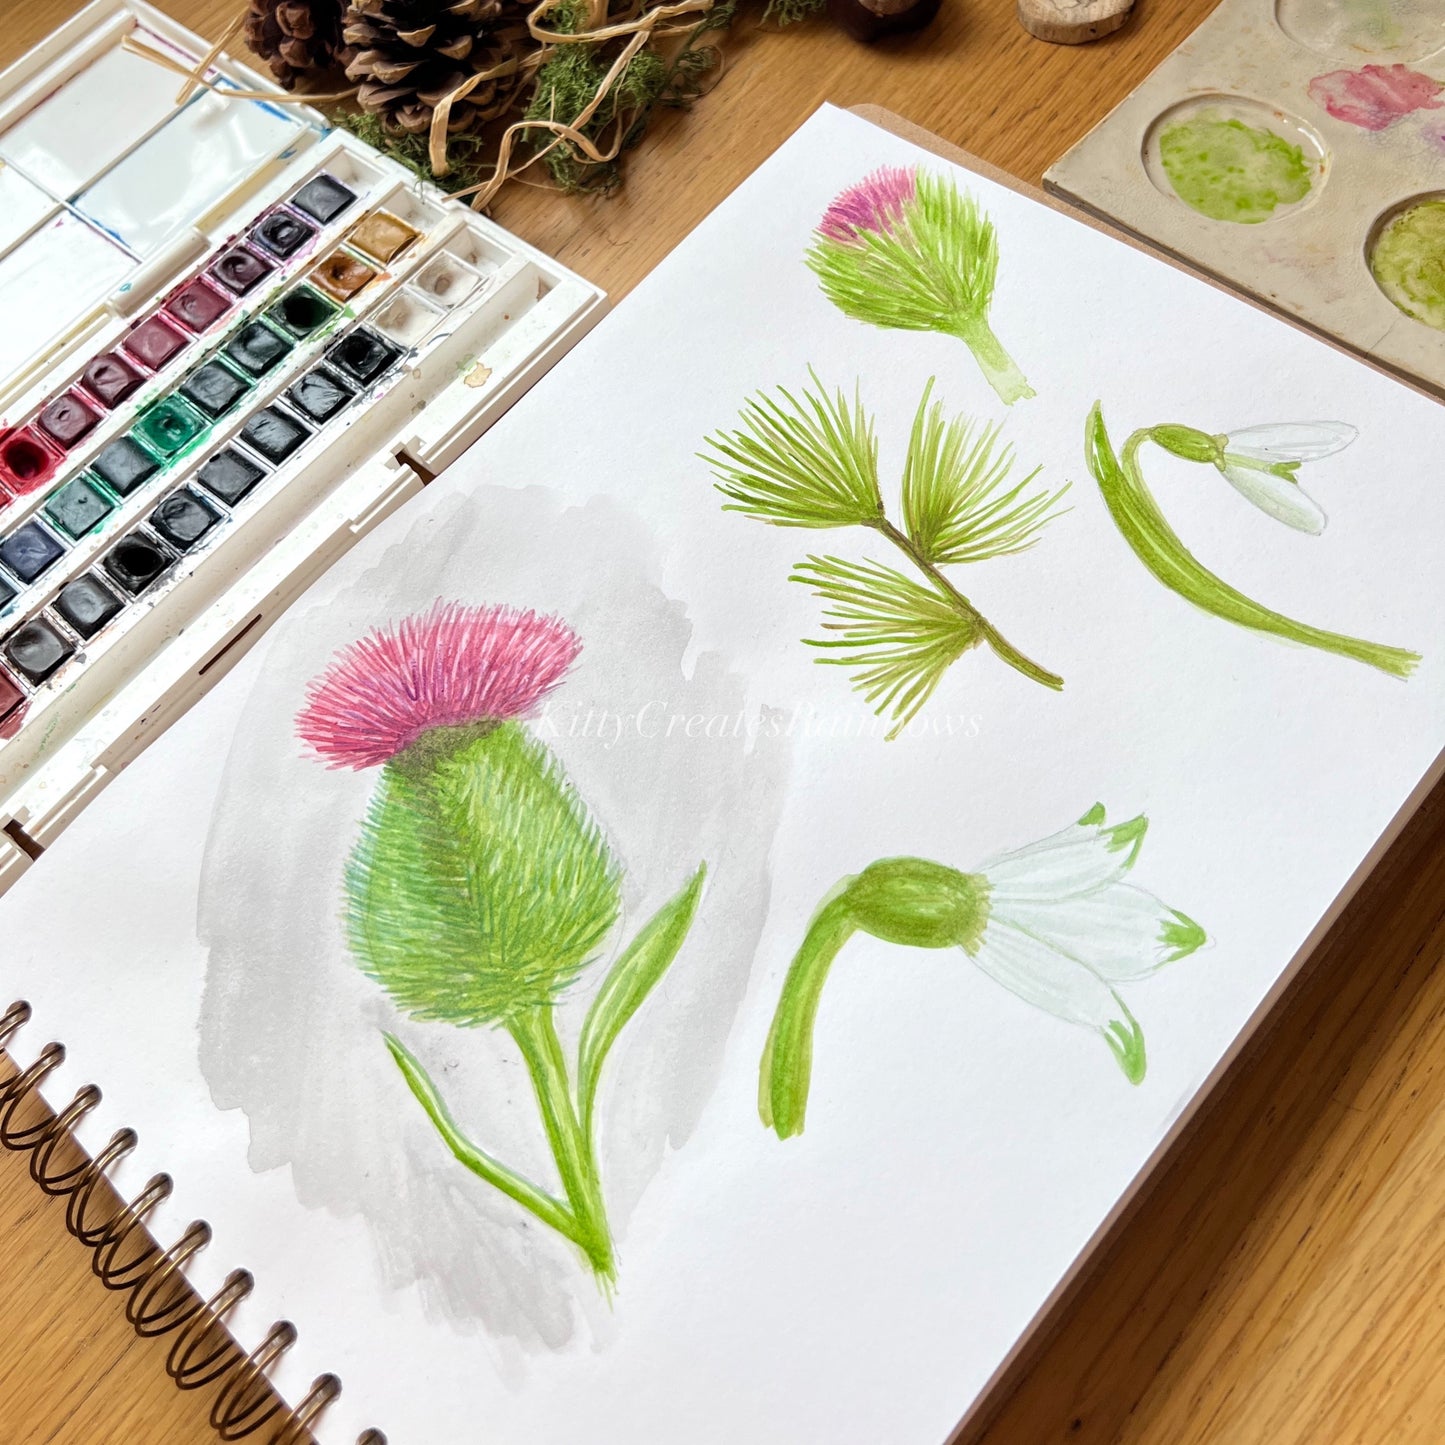 Original watercolour paintings of Thistle and other winter botanicals by Kat Lovatt